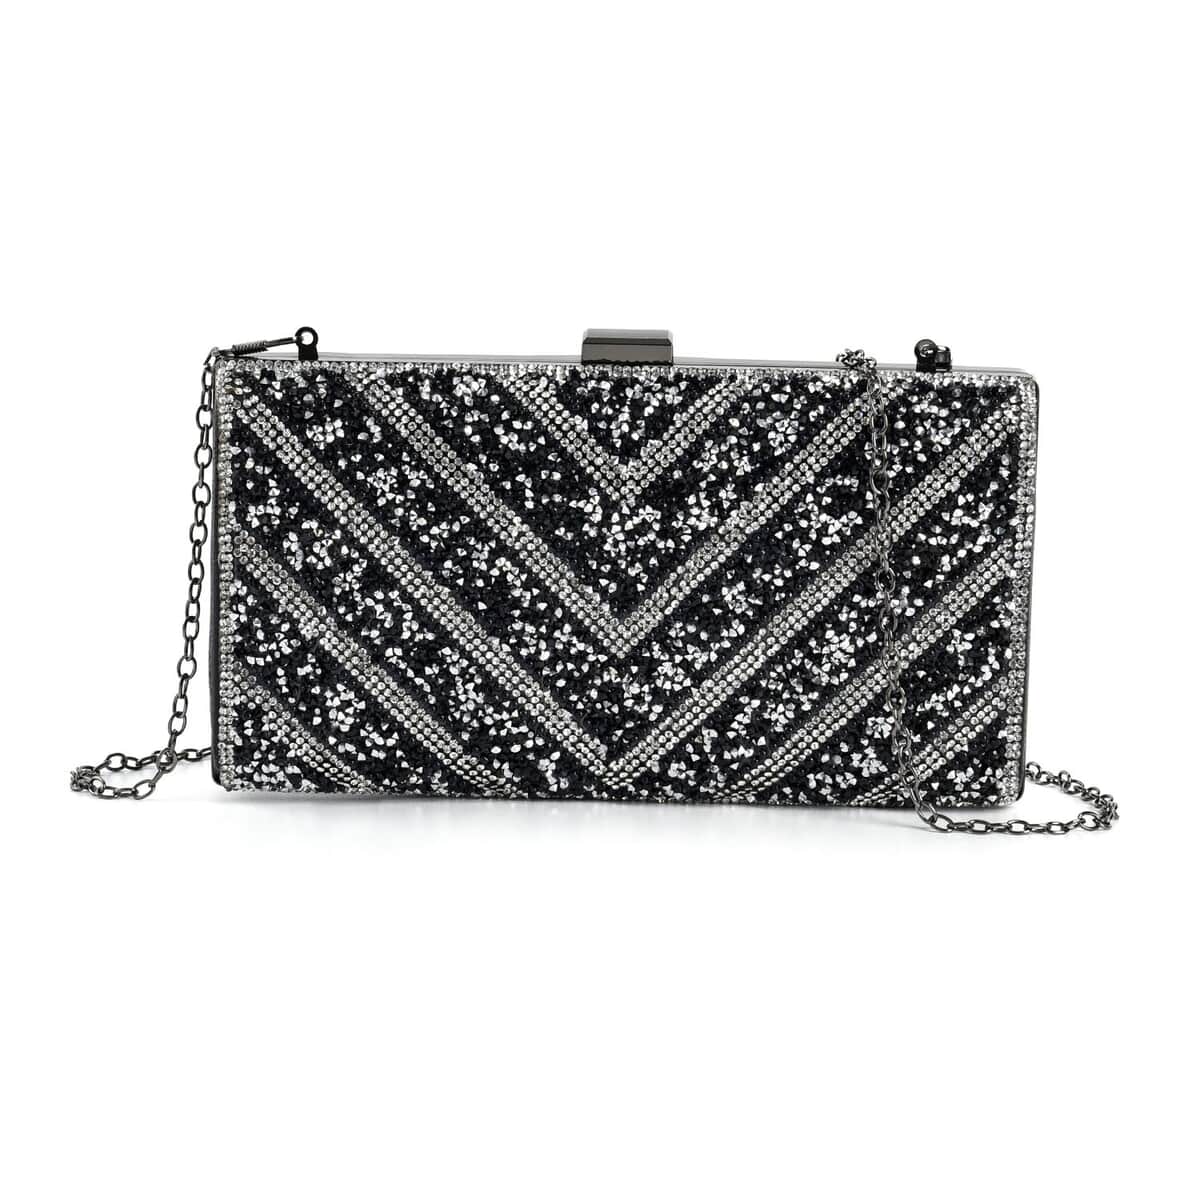 Black Sparkling Clutch Bag with Chain Strap image number 0